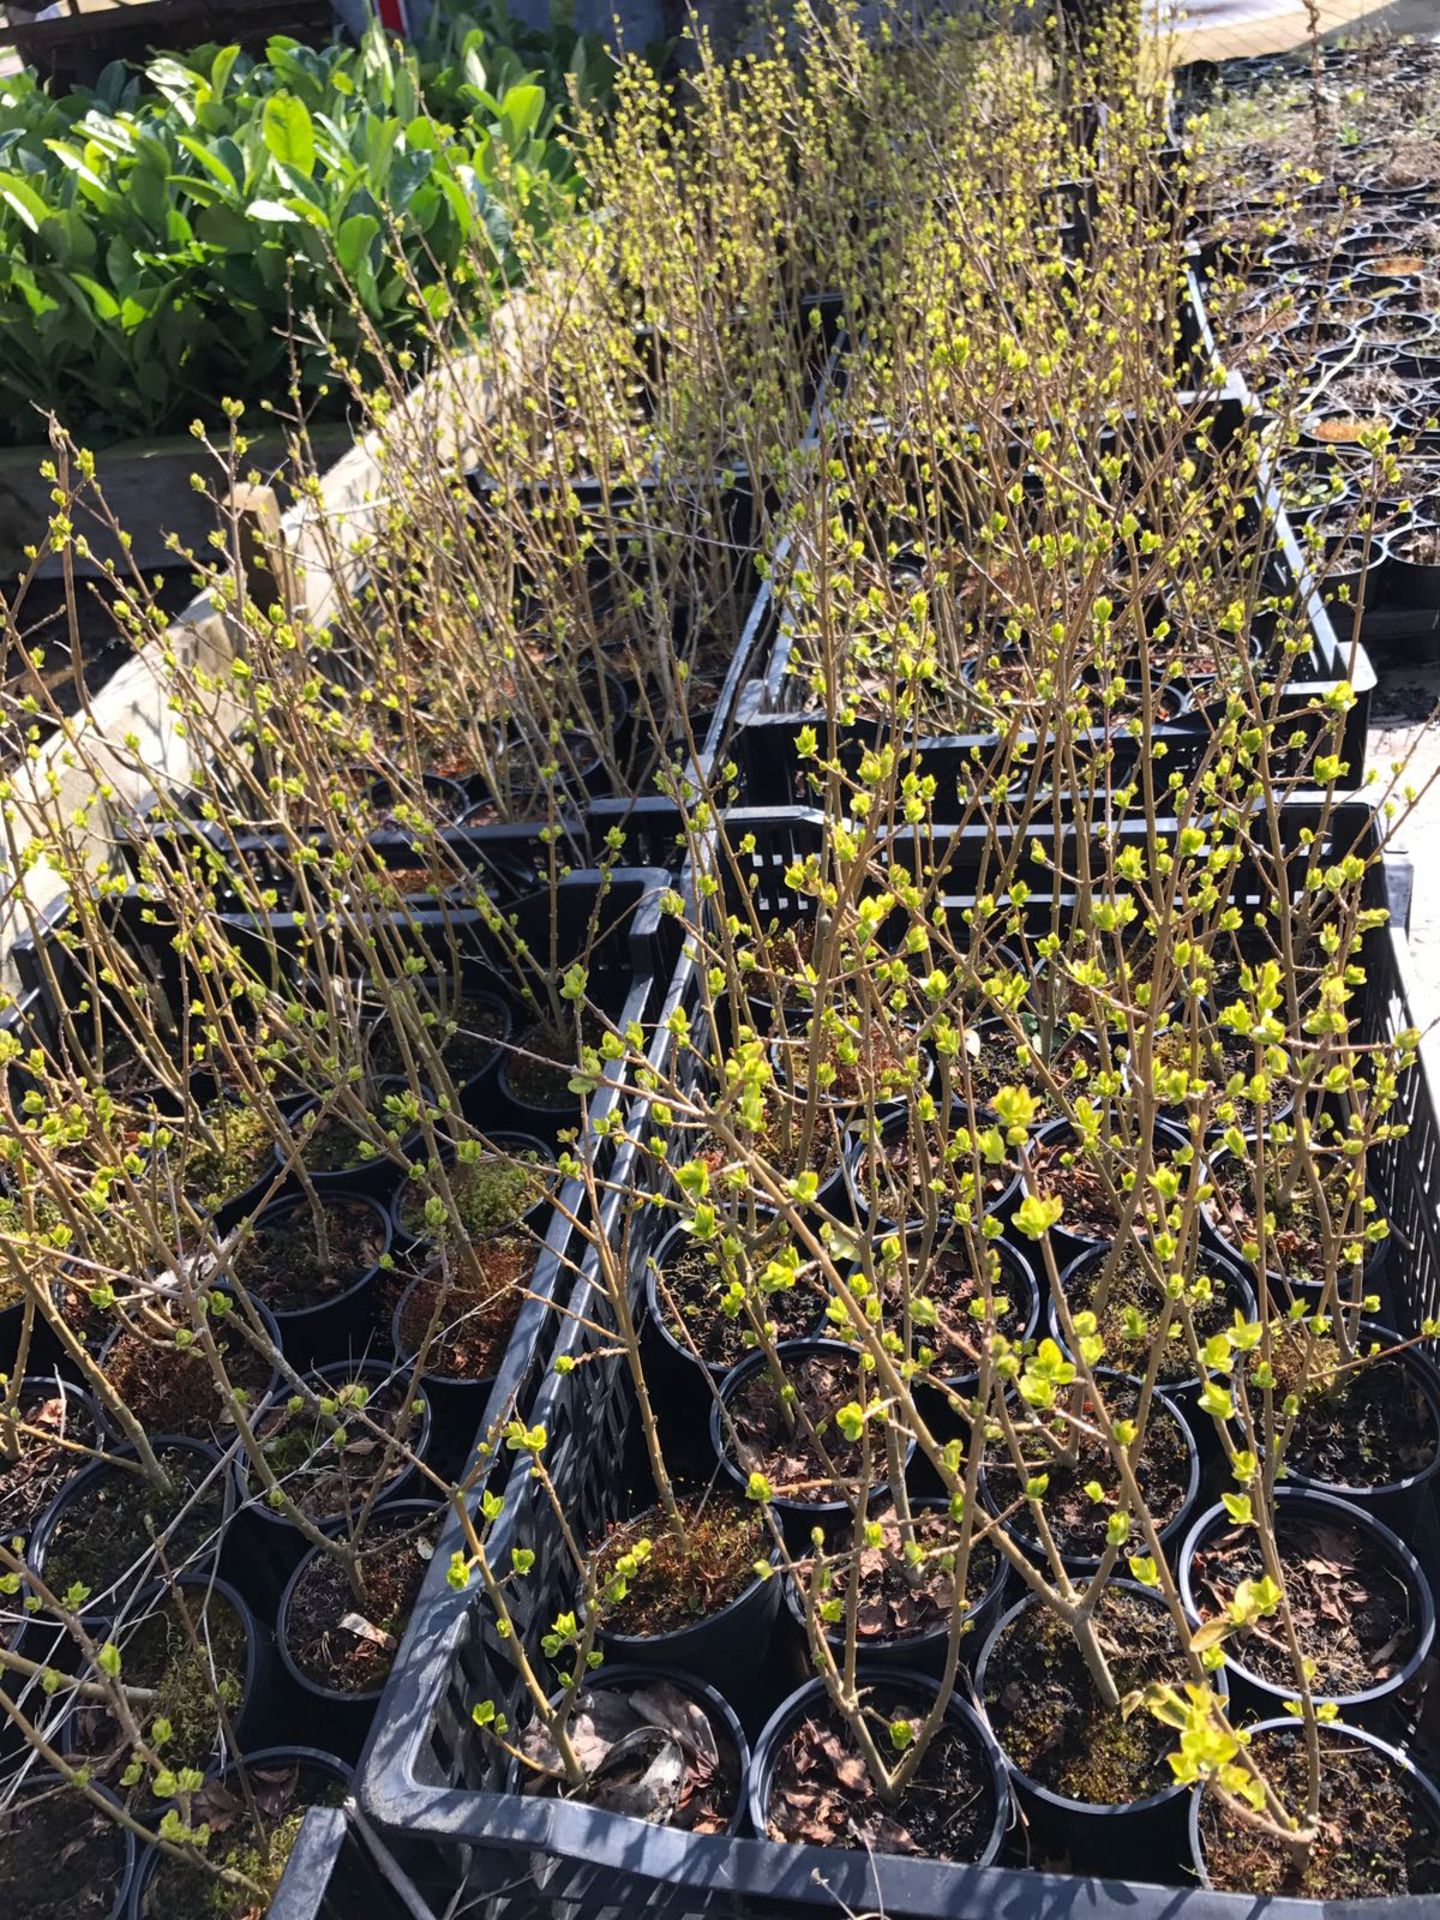 X50 LARGE PRIVET HEDGING PLANTS 500MM PLUS! 9CM POTS   lots more available directly from the Nursery - Image 2 of 3